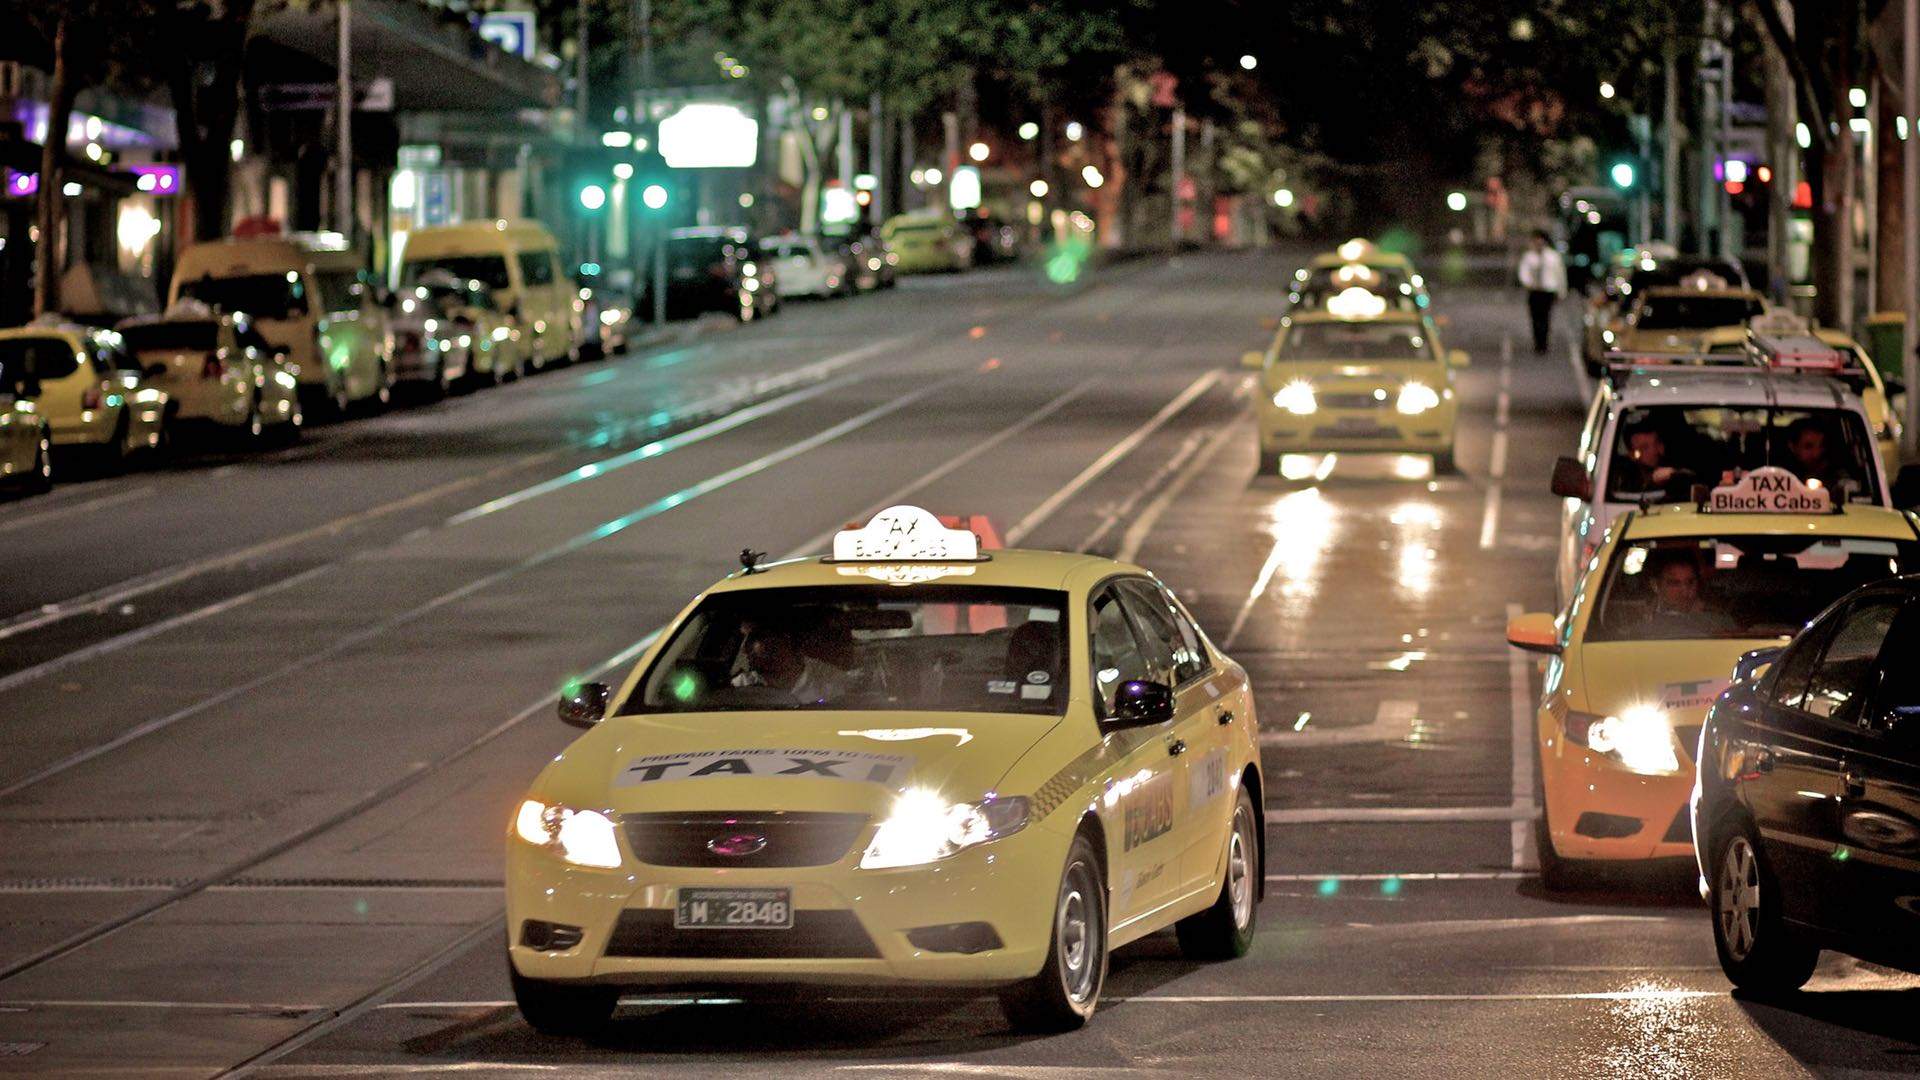 Meet Oiii, the New Uber-Like Taxi Service Now Driving Around Melbourne's Streets